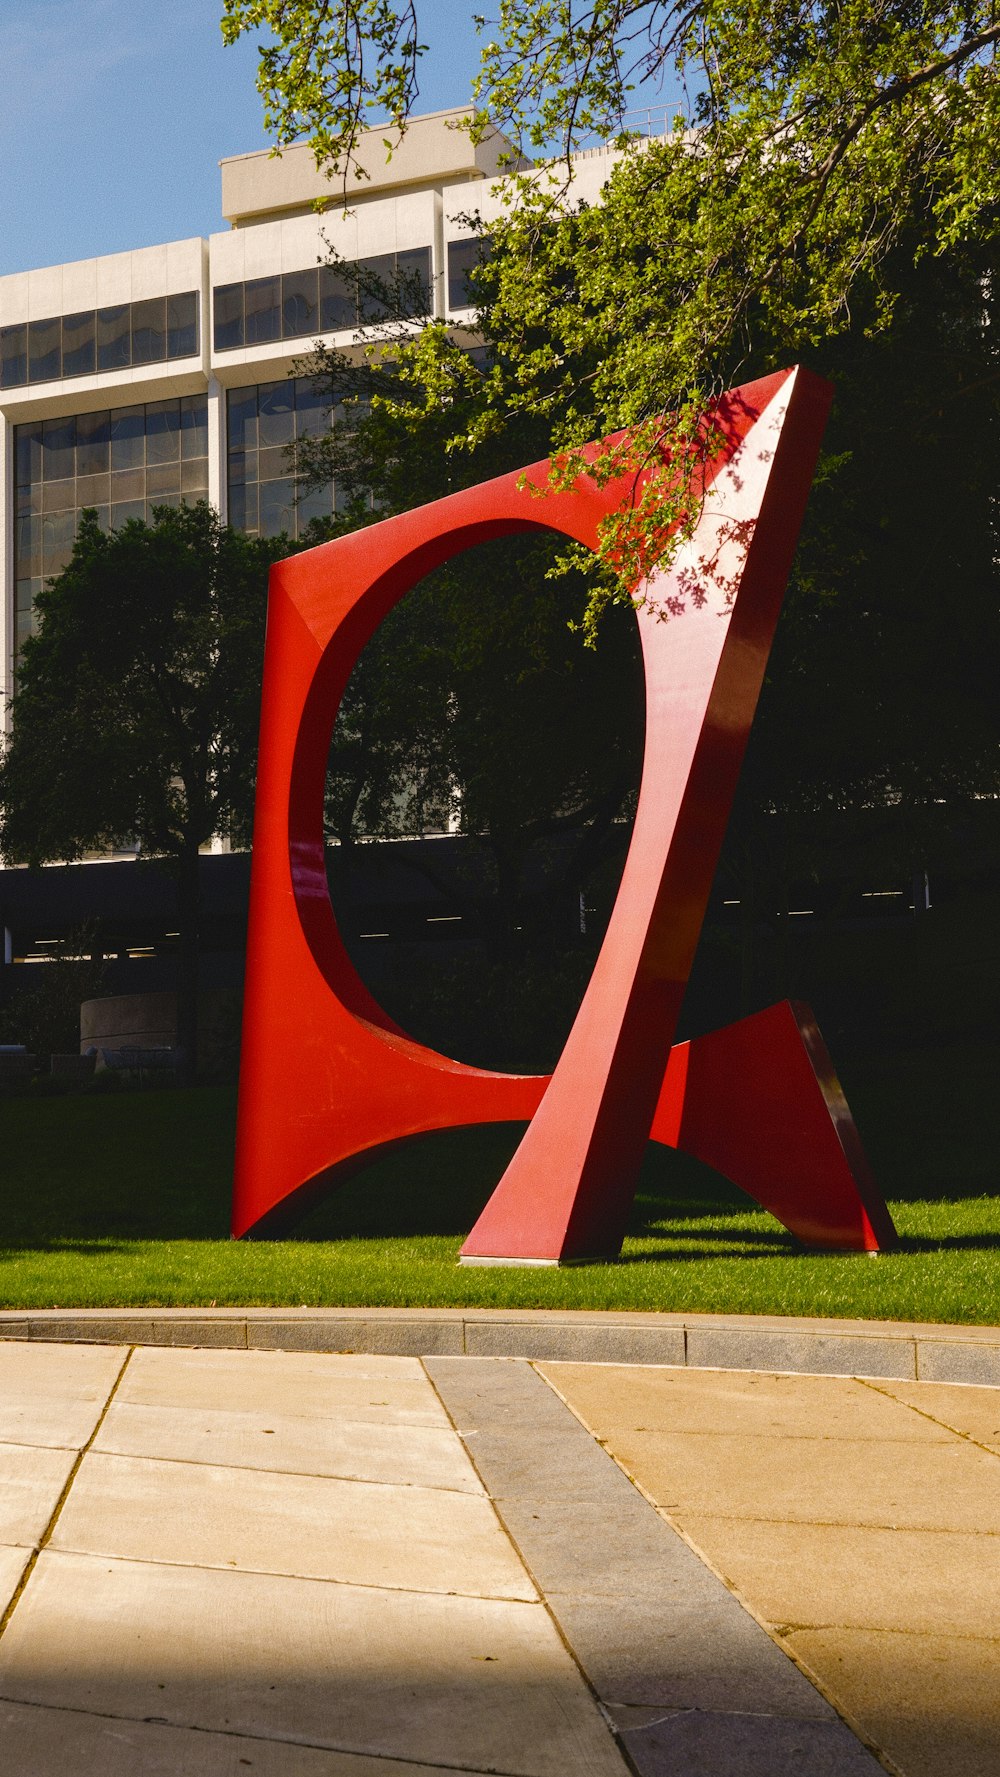 a large red sculpture sitting in the middle of a park